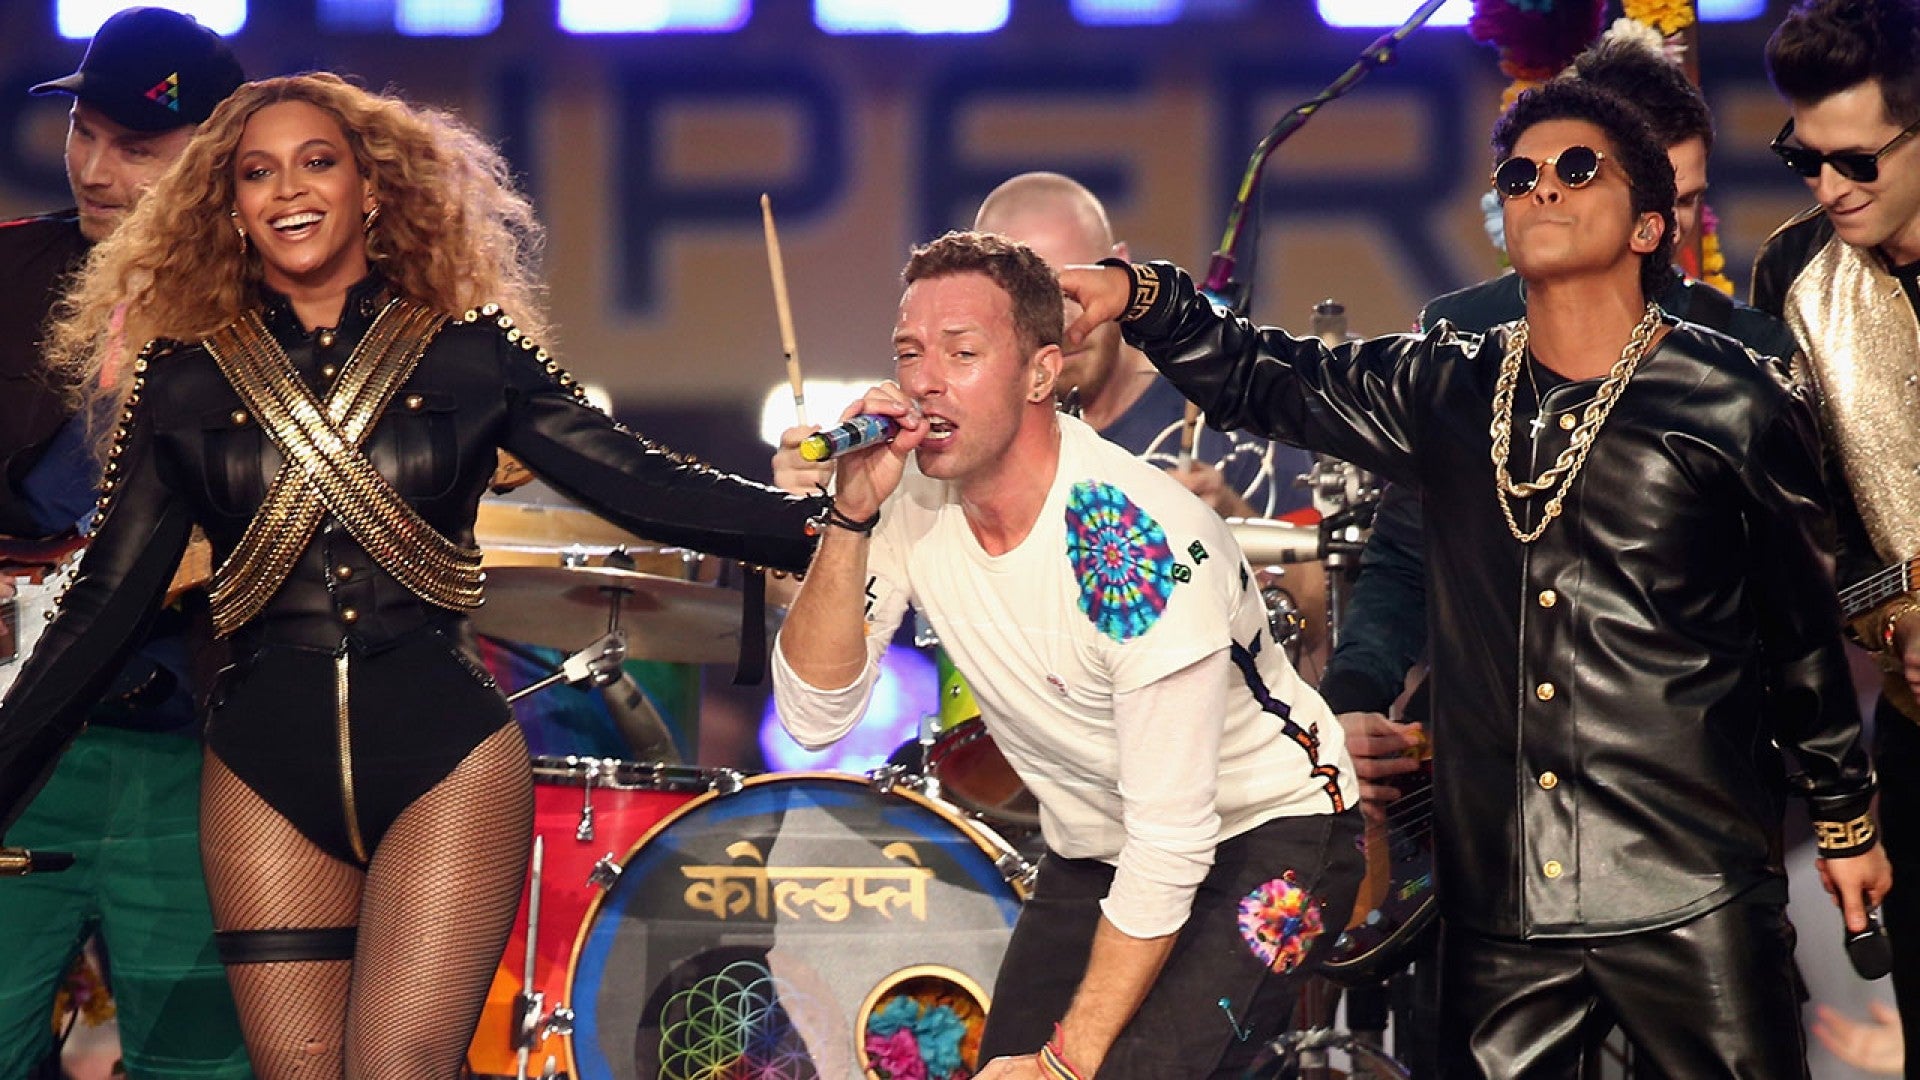 Coldplay to honor past, present and future at Super Bowl